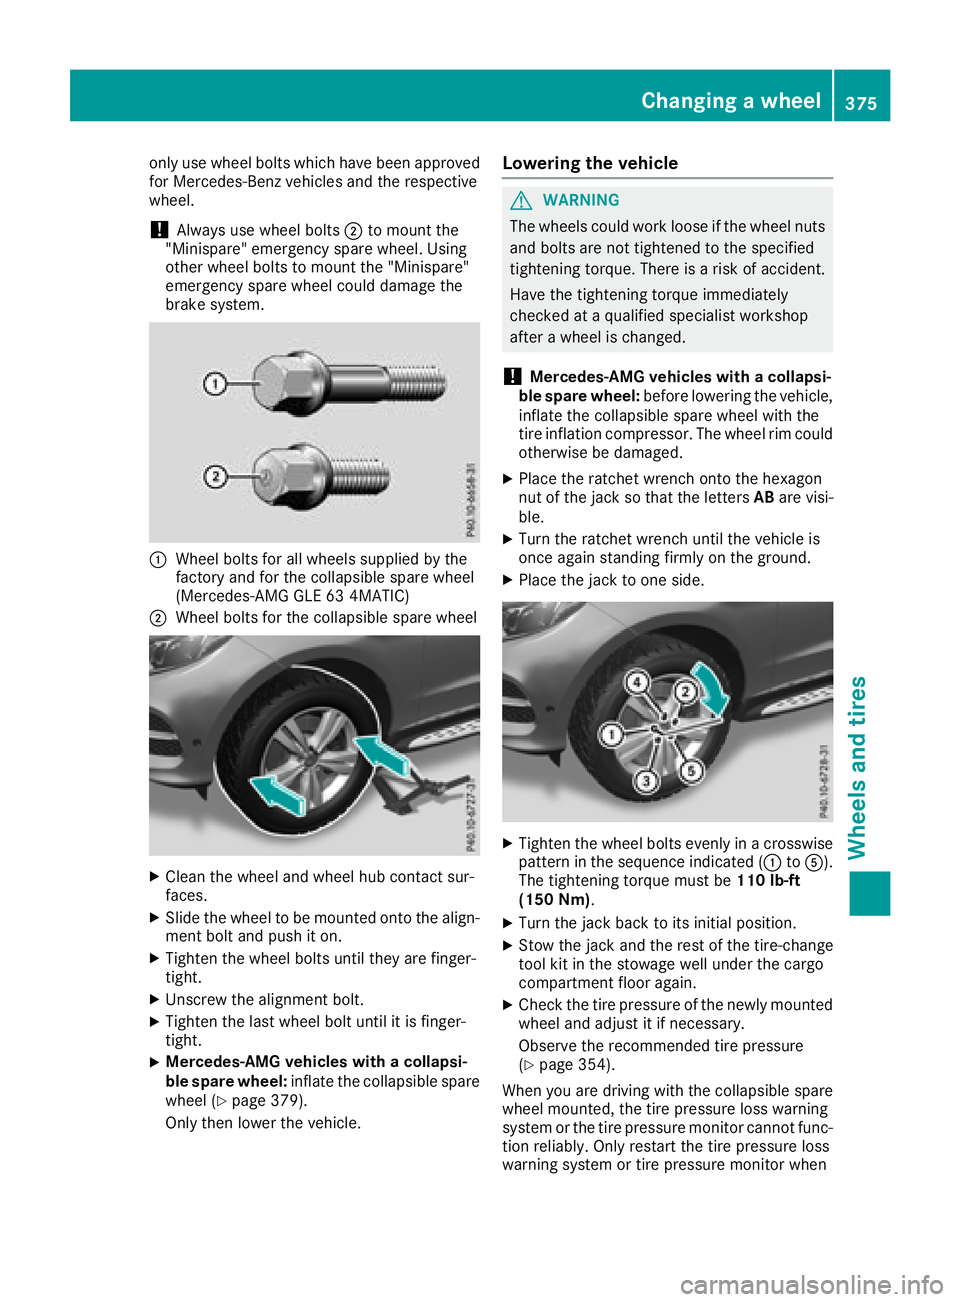 MERCEDES-BENZ GLE SUV 2018  Owners Manual only use wheel bolts which have been approved
for Mercedes-Benz vehicles and the respective
wheel.
!Always use wheel bolts;to mount the
"Minispare" emergency spare wheel. Using
other wheel bol